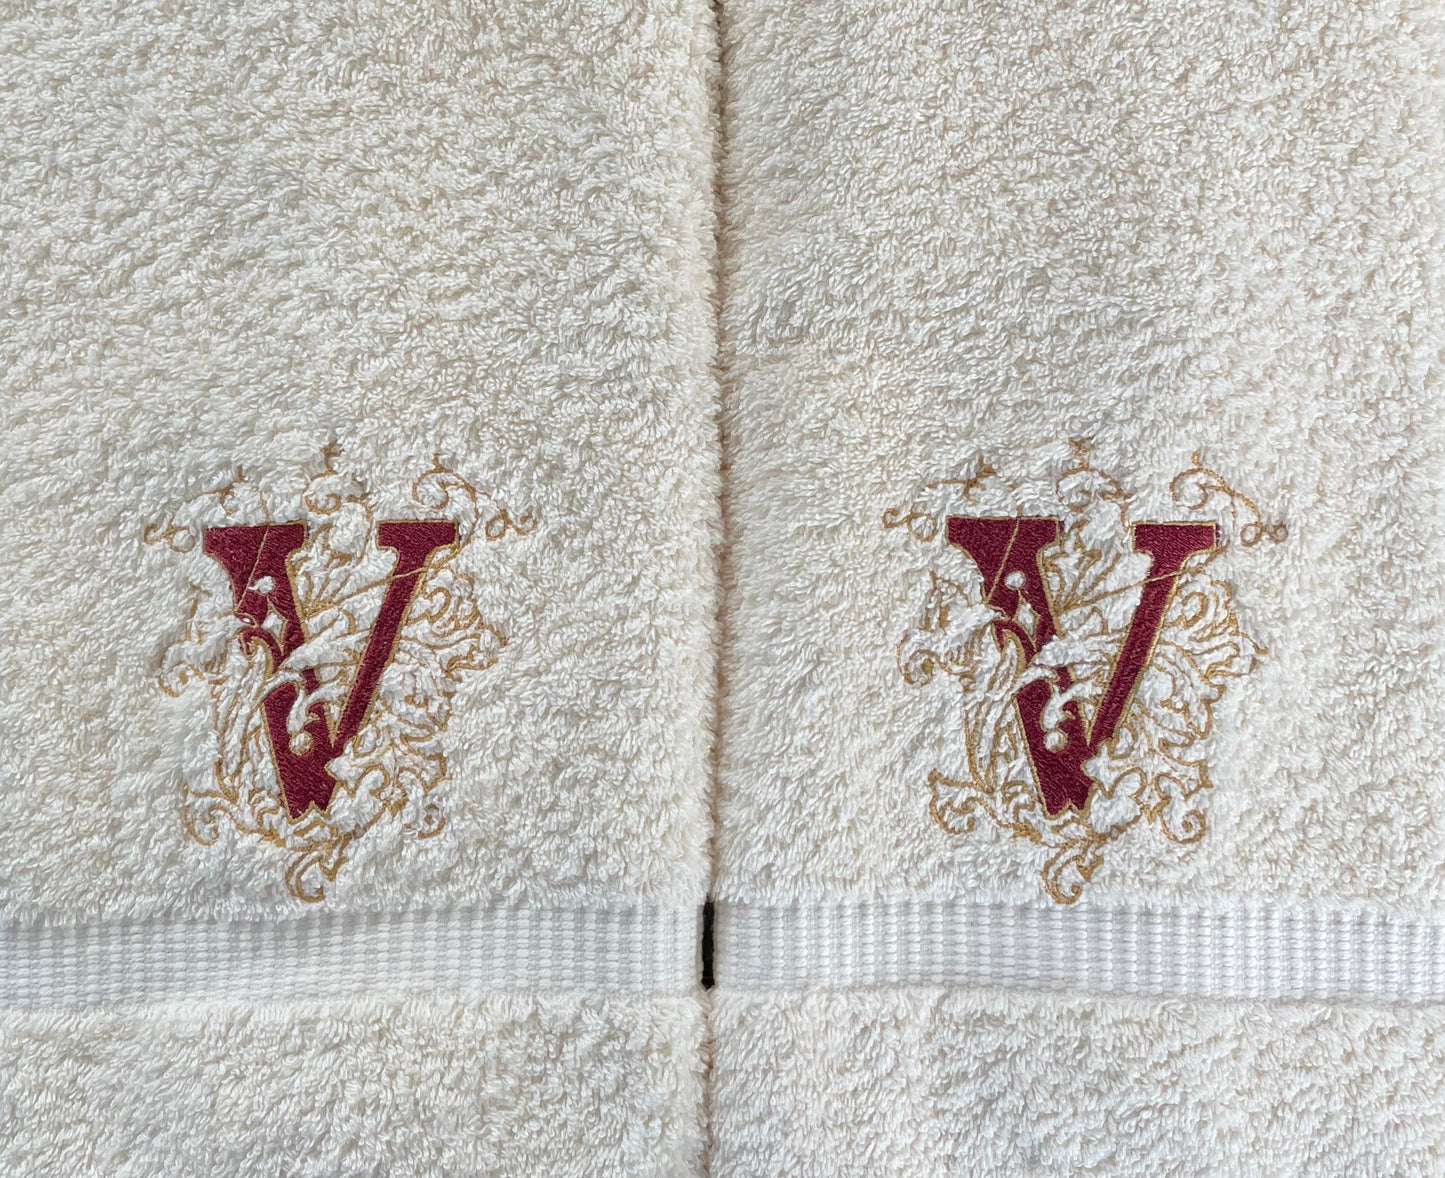 Embroidered Monogram Guest Hand Towel. Beautiful Monogram Letter With Scrolling. Choice of Color Combination